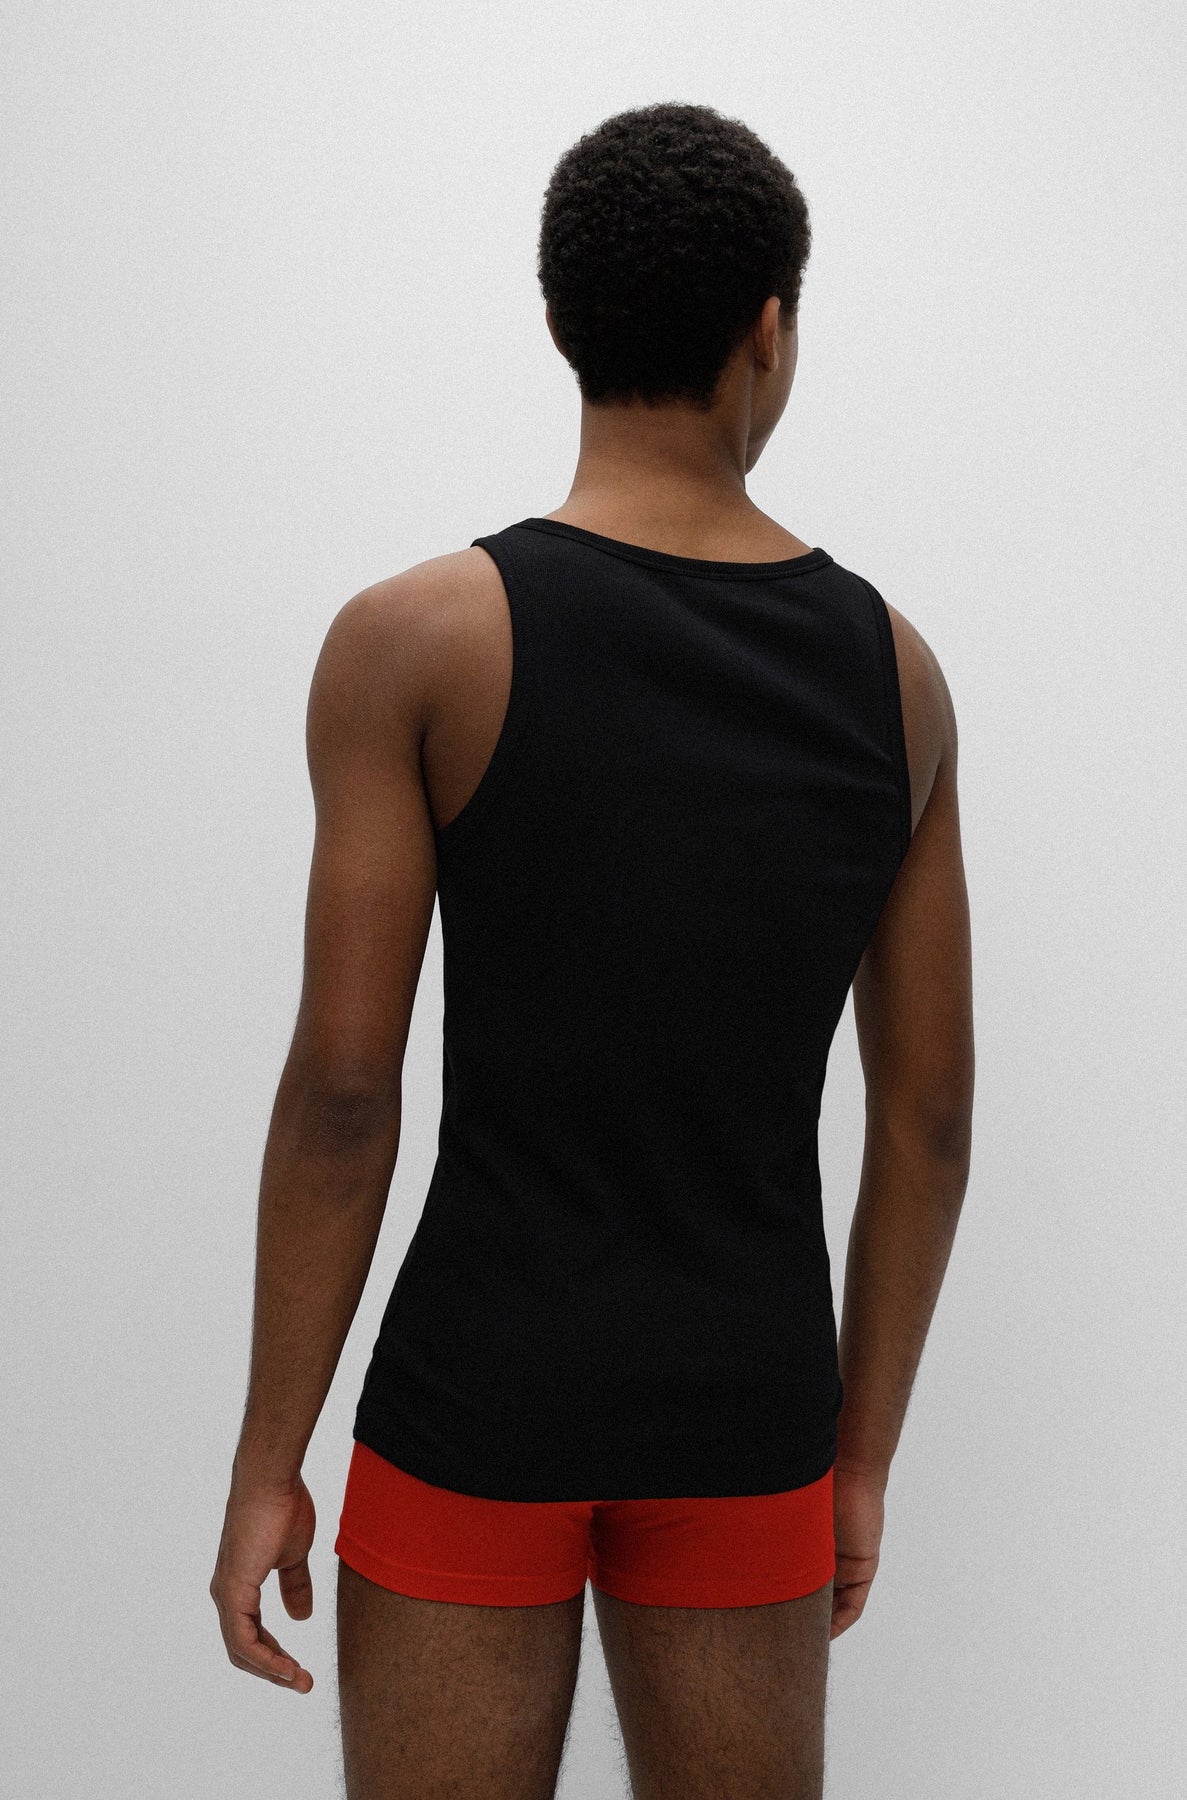 HUGO Slim Fit Tank Tops in cotton mix - TANK TOP TWIN PACK 10217231  03-50469778 from Concorde Fashion